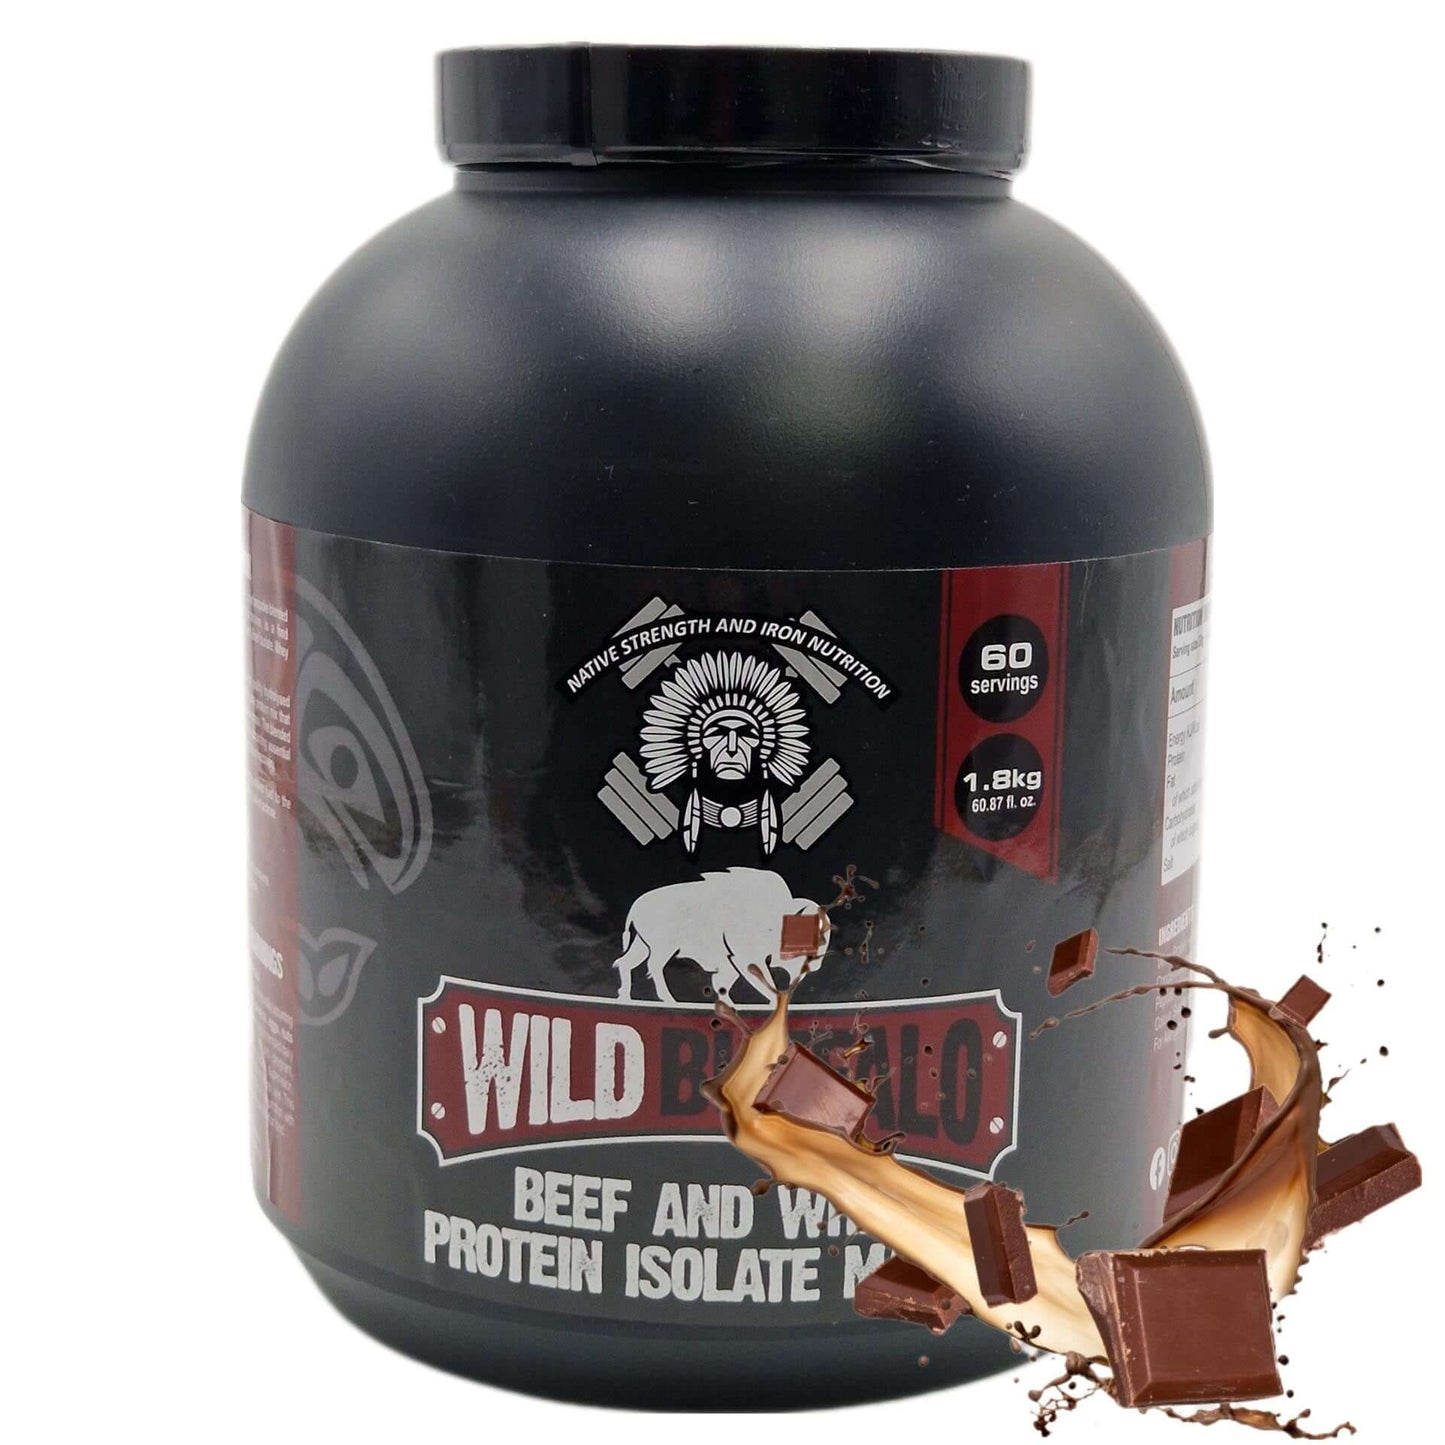 Wild Buffalo Beef and Whey Protein Isolate Matrix Choclate